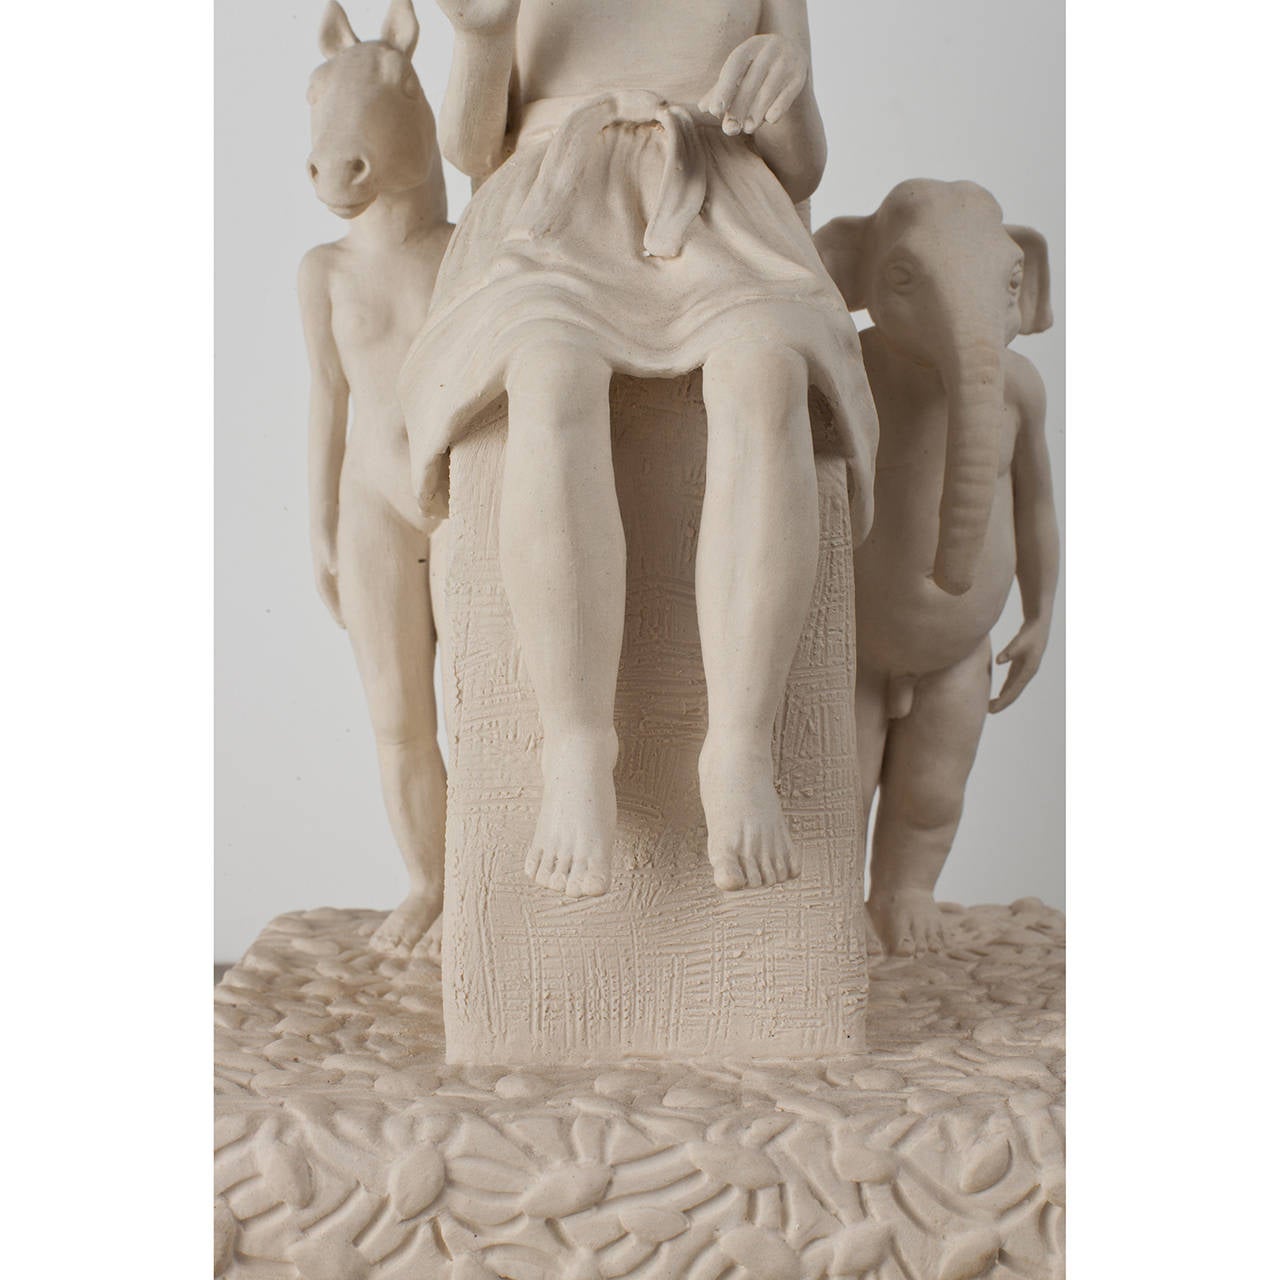 Her Holiness and Friends - Contemporary Sculpture by Tricia Cline